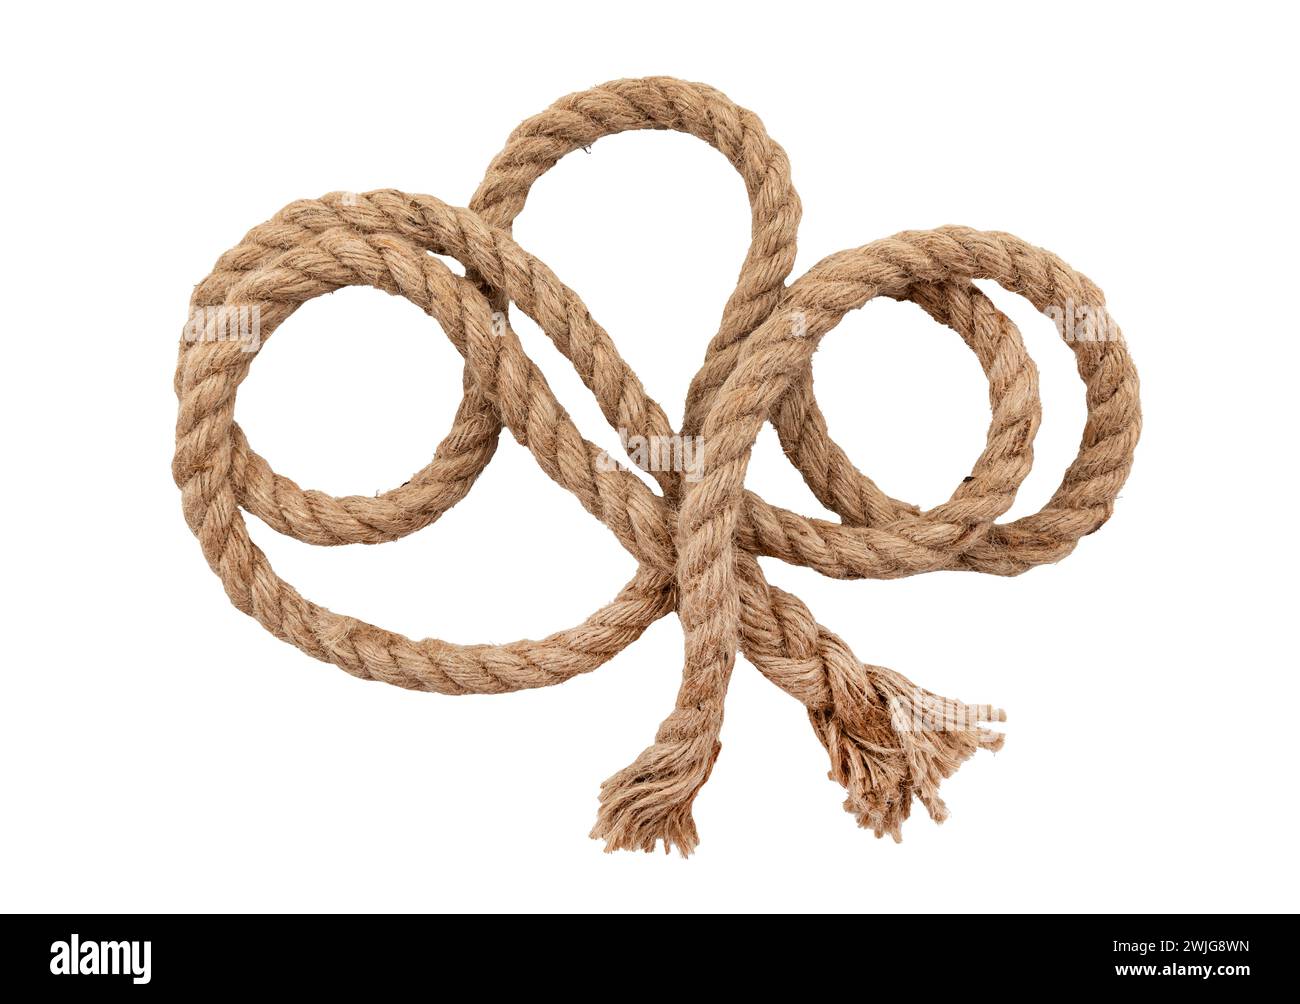 Rope made of jute in loops and knots on a white background. Linen twisted rope isolate Stock Photo